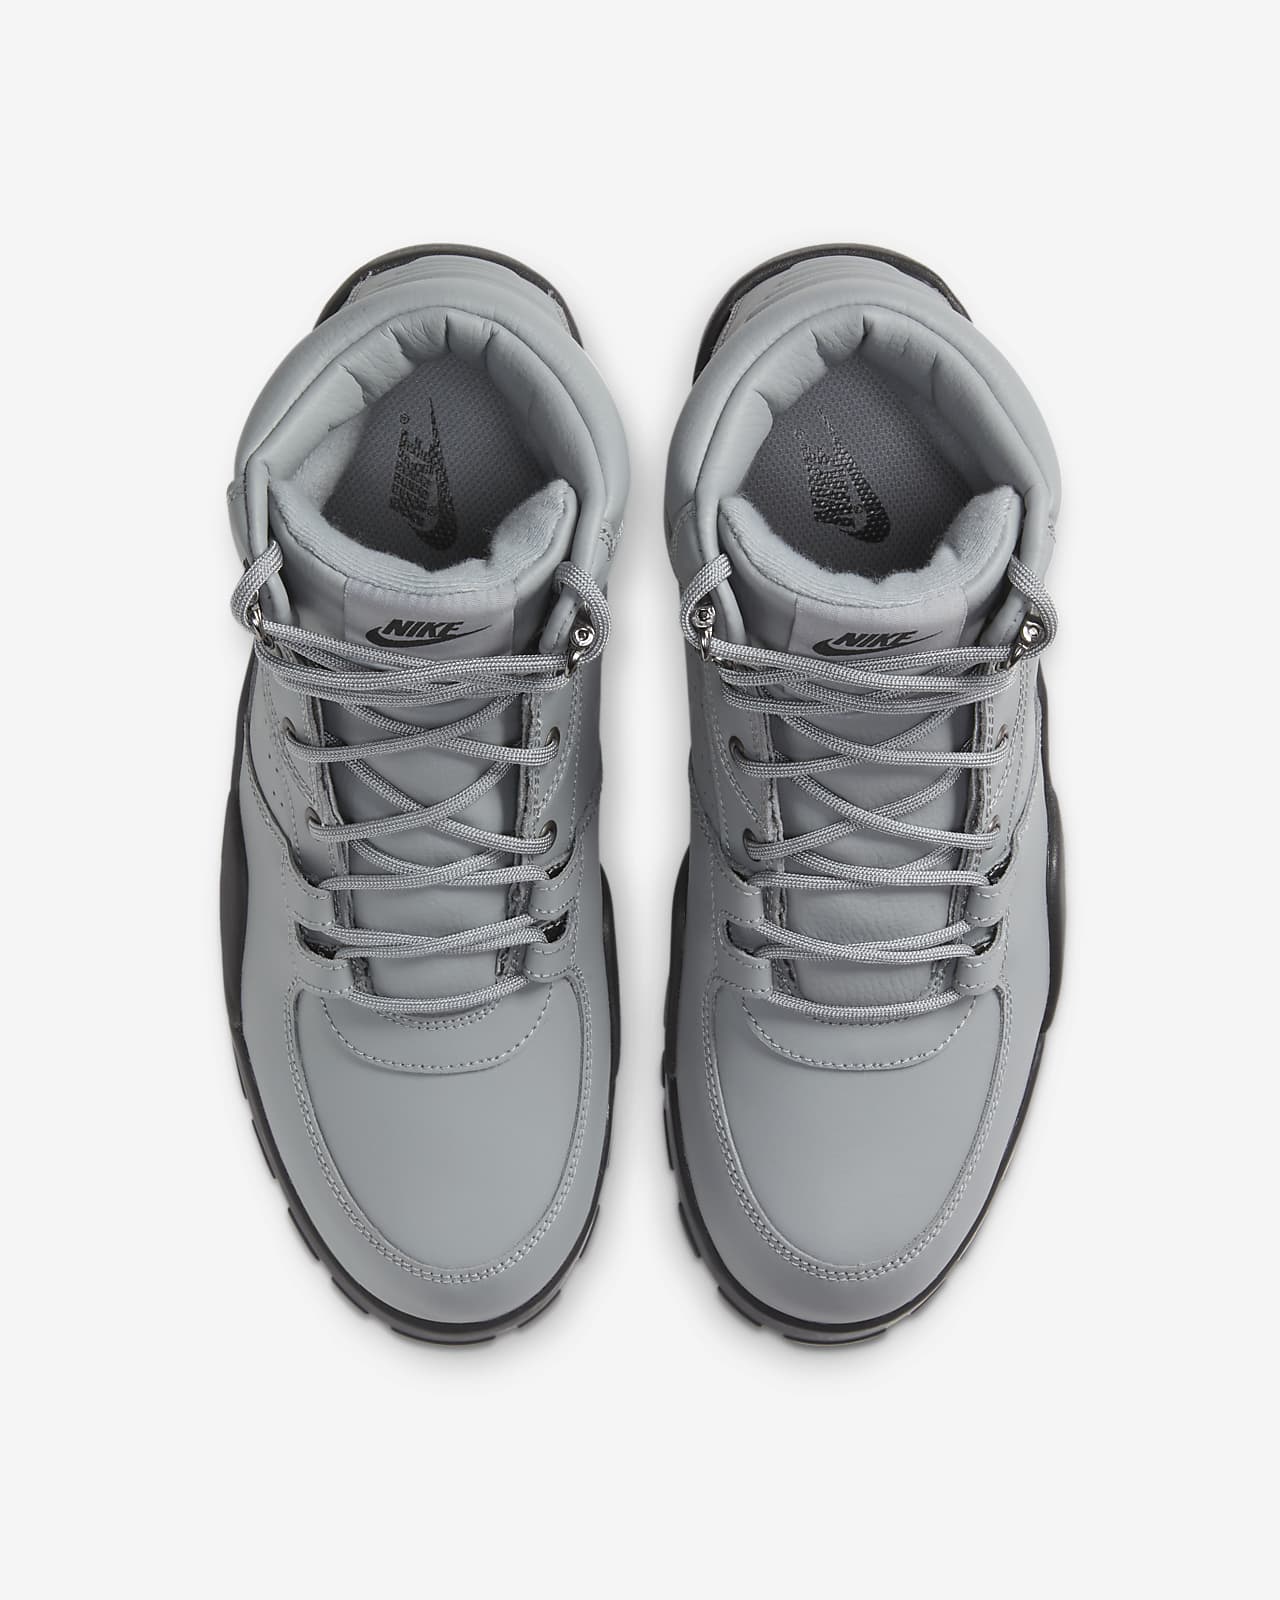 nike gray boots